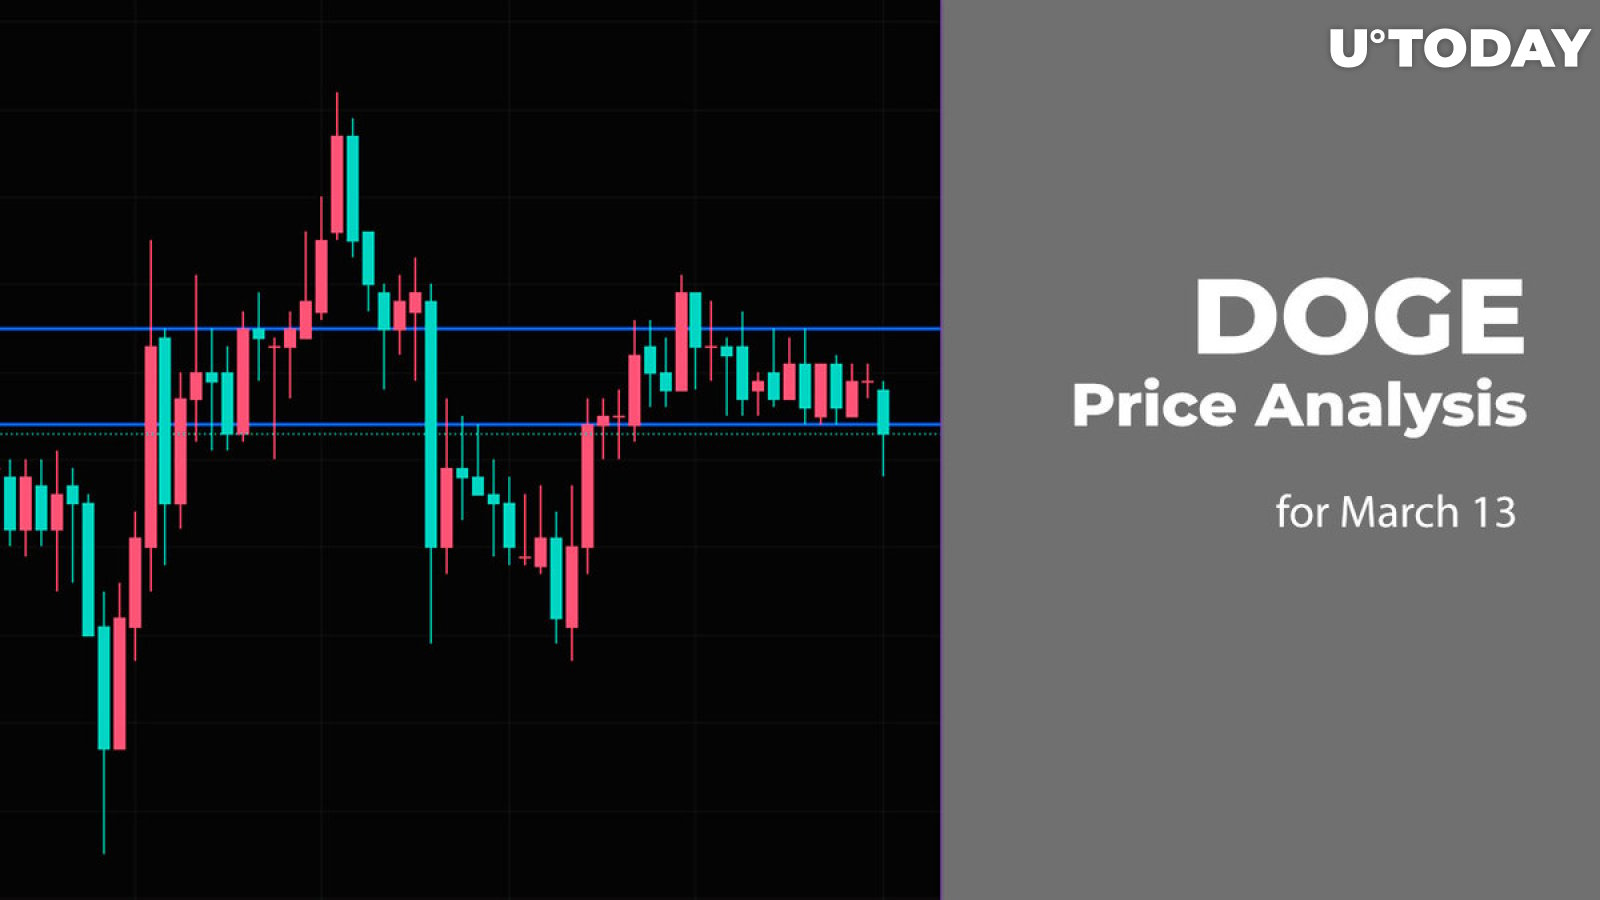 DOGE Price Analysis for March 13